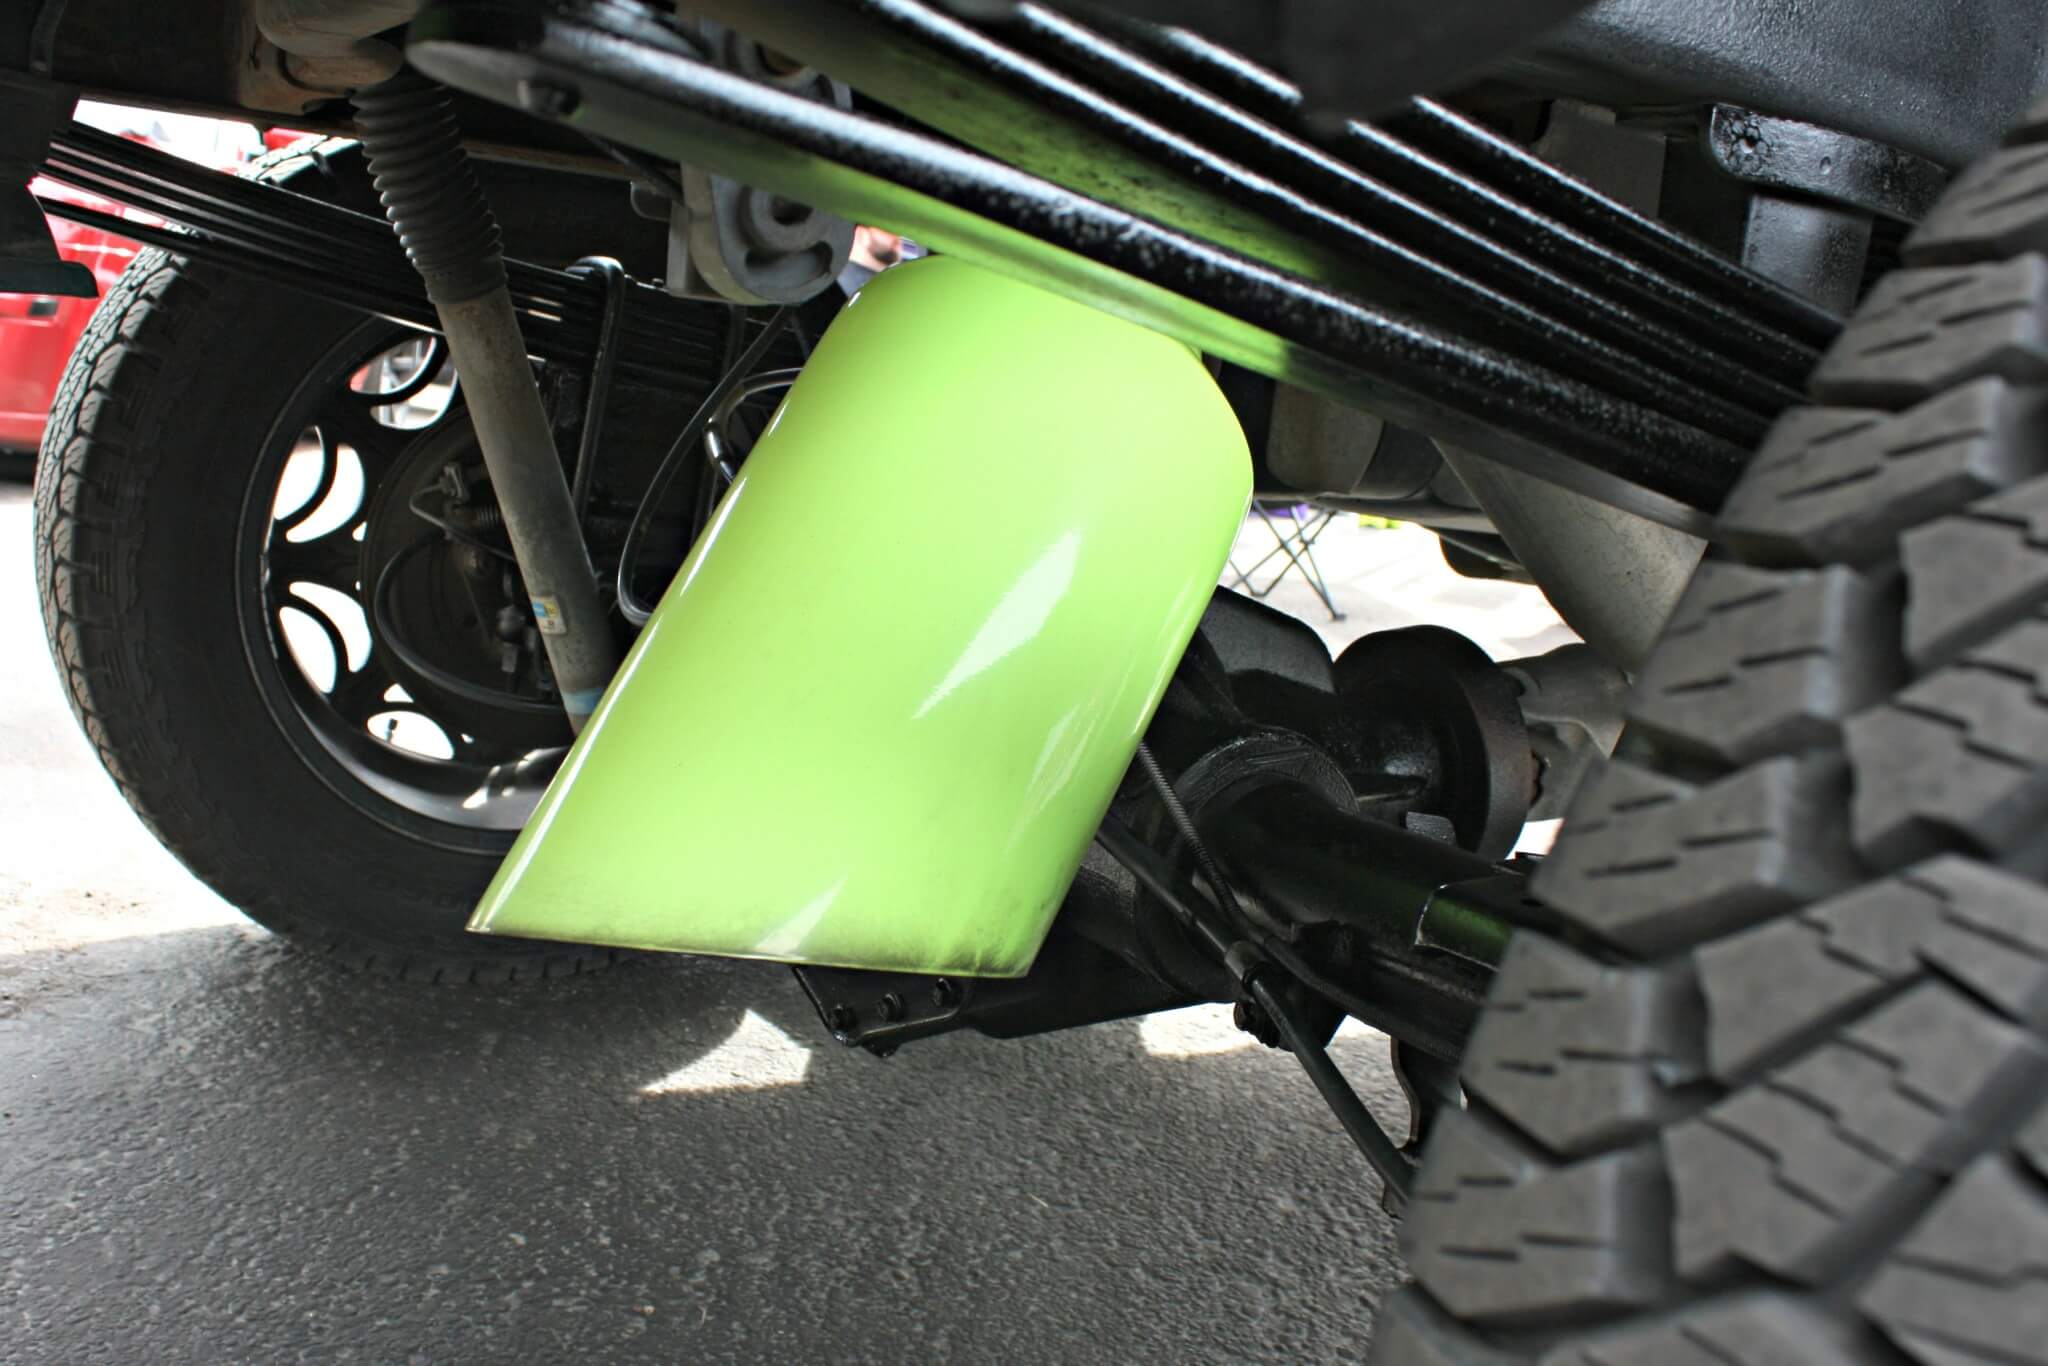 We found this at the No Limit Powder Coat booth on vendor’s alley. Their lifted Duramax was sporting monstrous neon green over the axle dump exhaust system. Here you can see the tip. This is something pretty unique but very fitting for the owner’s line of work.